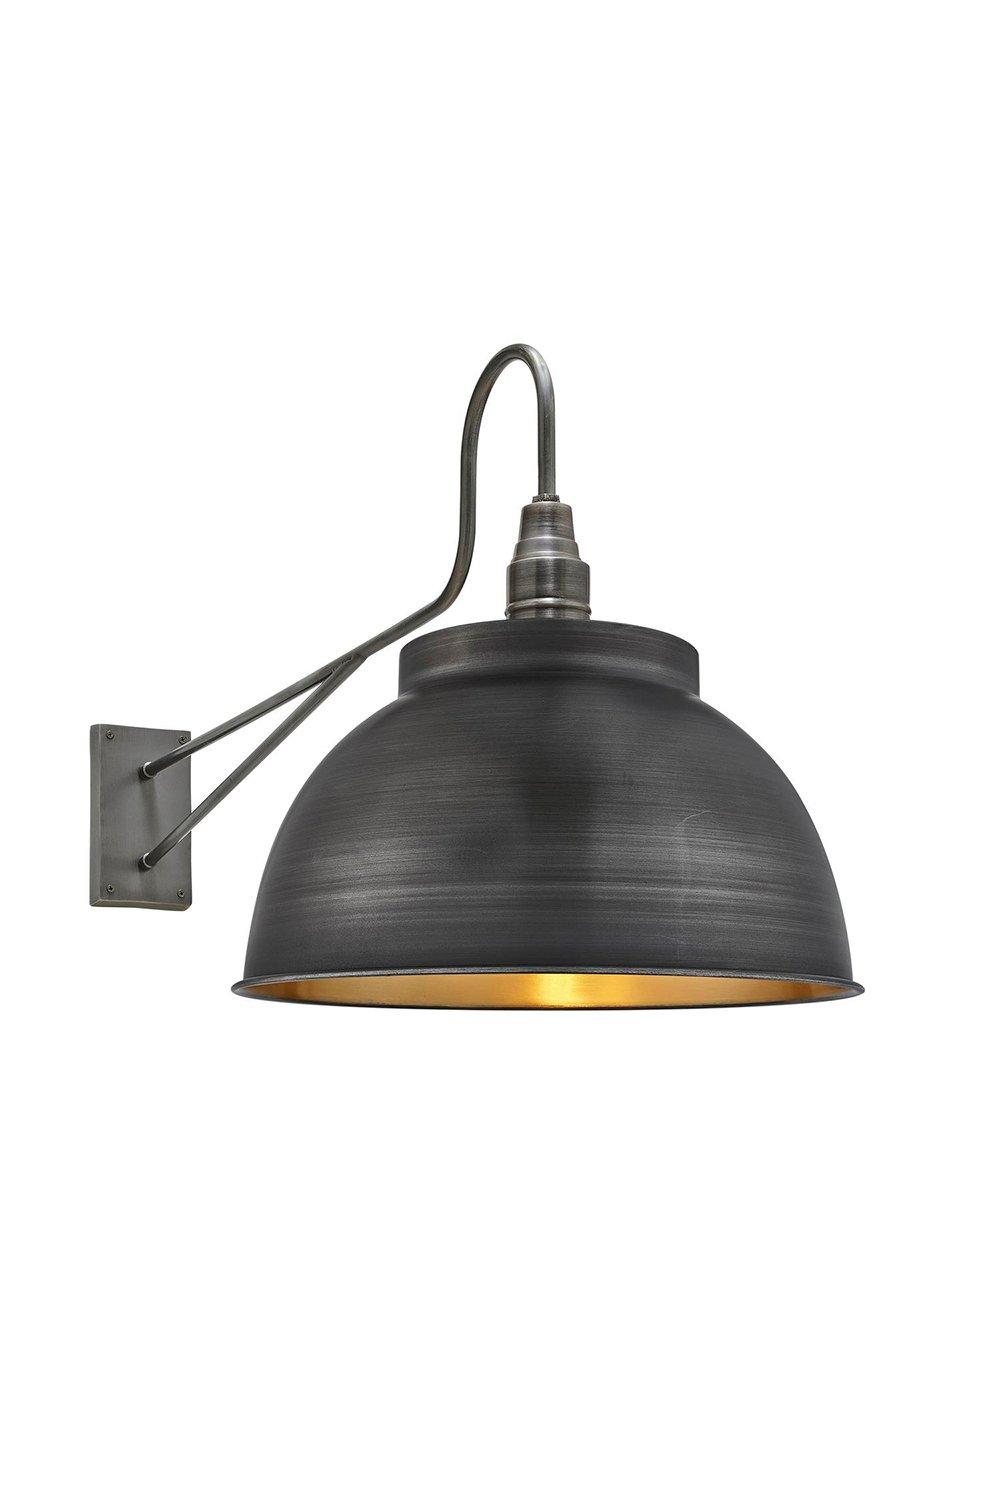 Long Arm Dome Wall Light, 17 Inch, Pewter & Brass, Pewter Holder